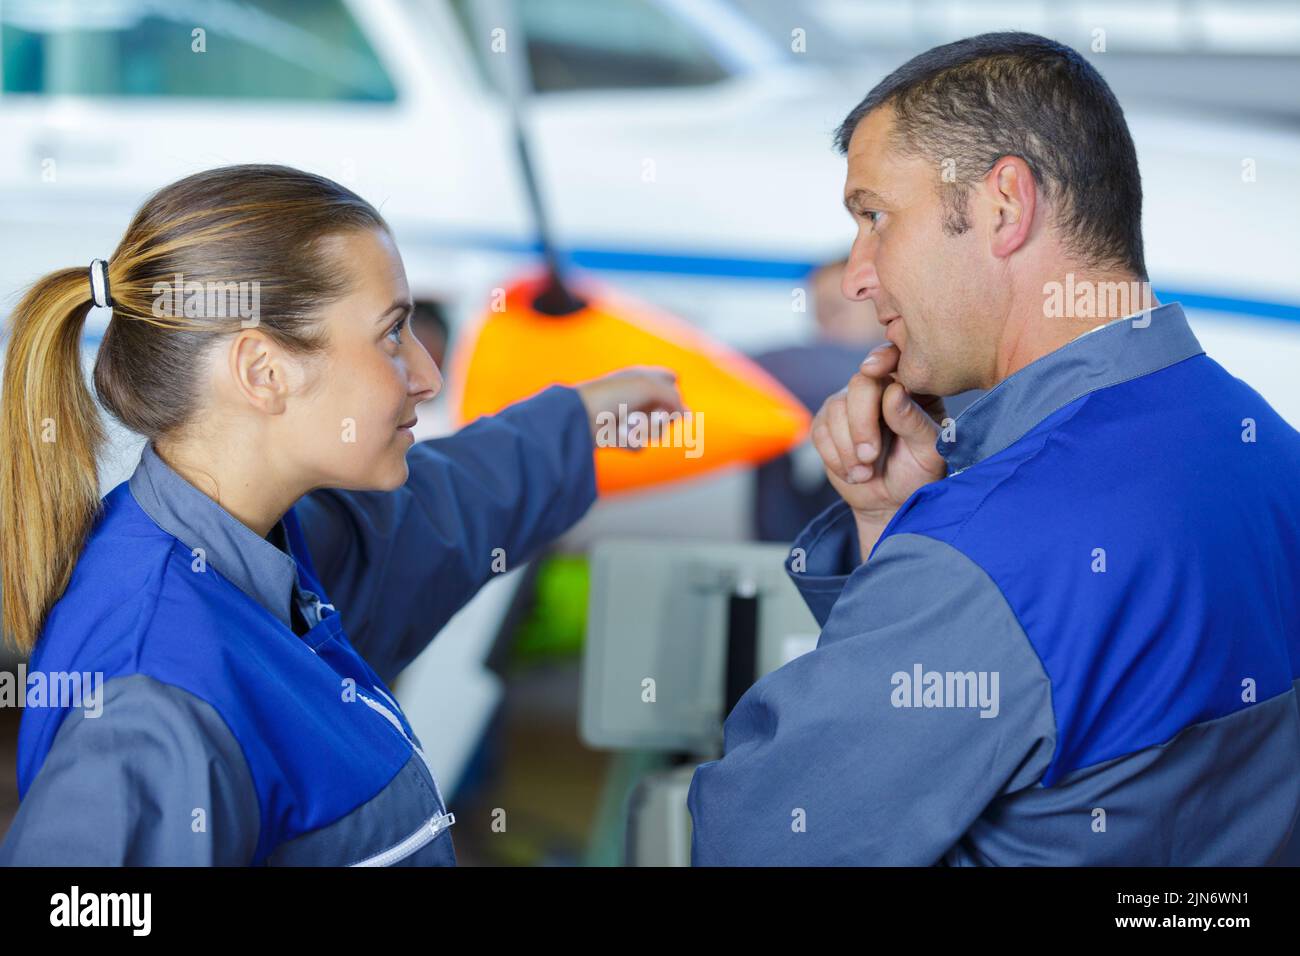 man and woman discuss repairs Stock Photo